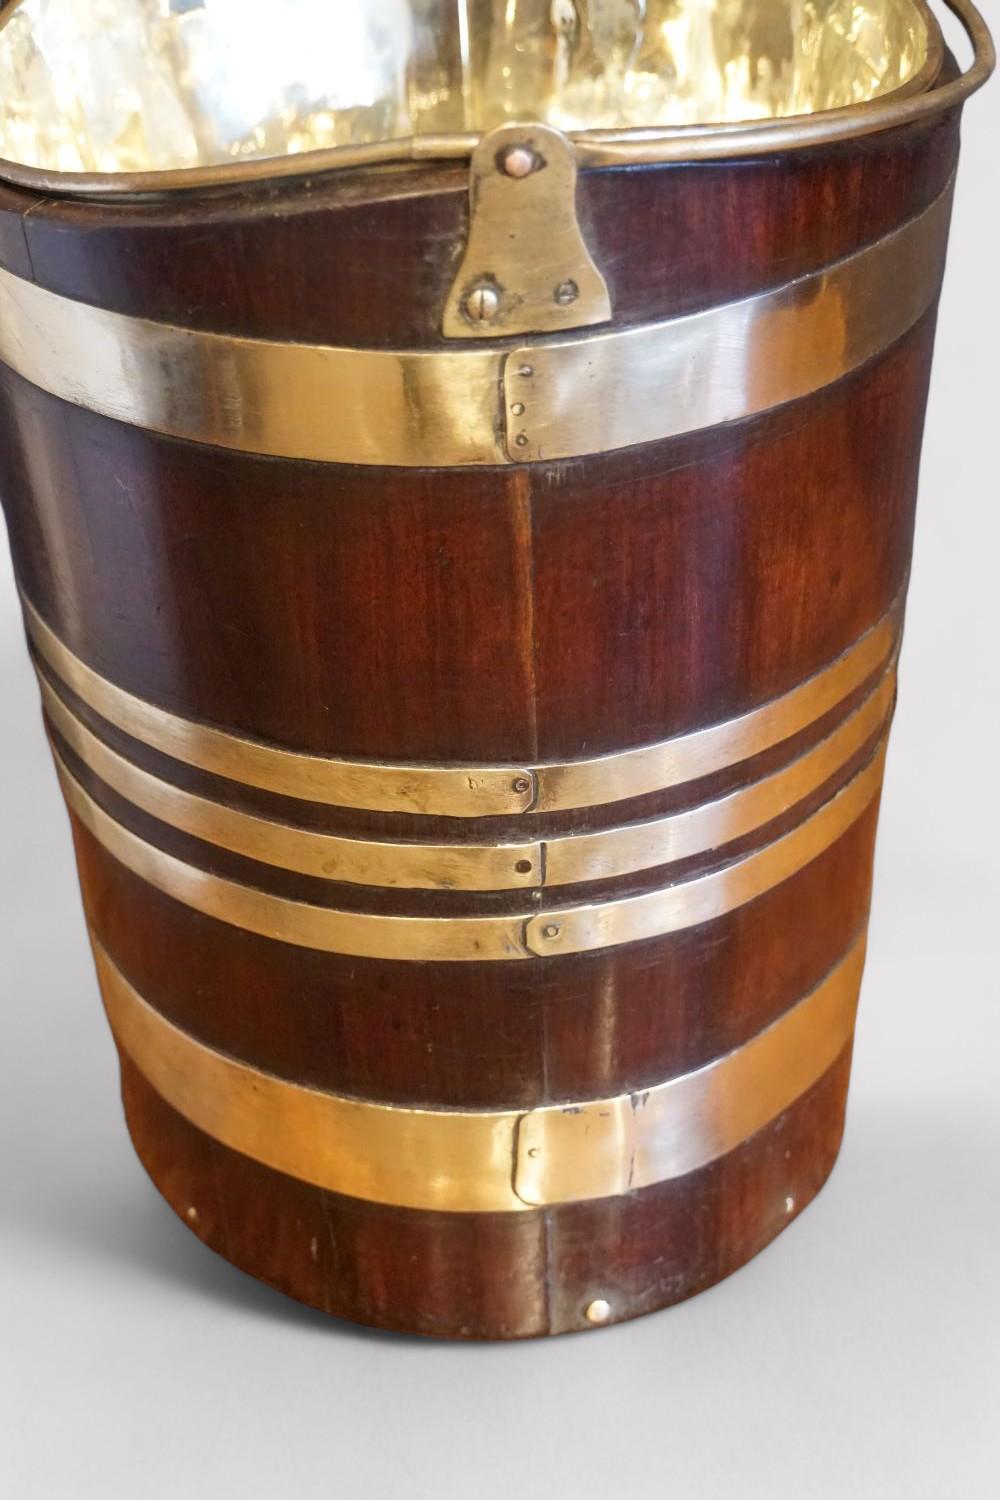 Antique brass bound mahogany bucket
This Antique brass bound mahogany bucket was made in the Georgian period.
The mahogany body made of coppered slats that are secured by the fine brass banding.
It has a lift out brass liner, this was to be used for